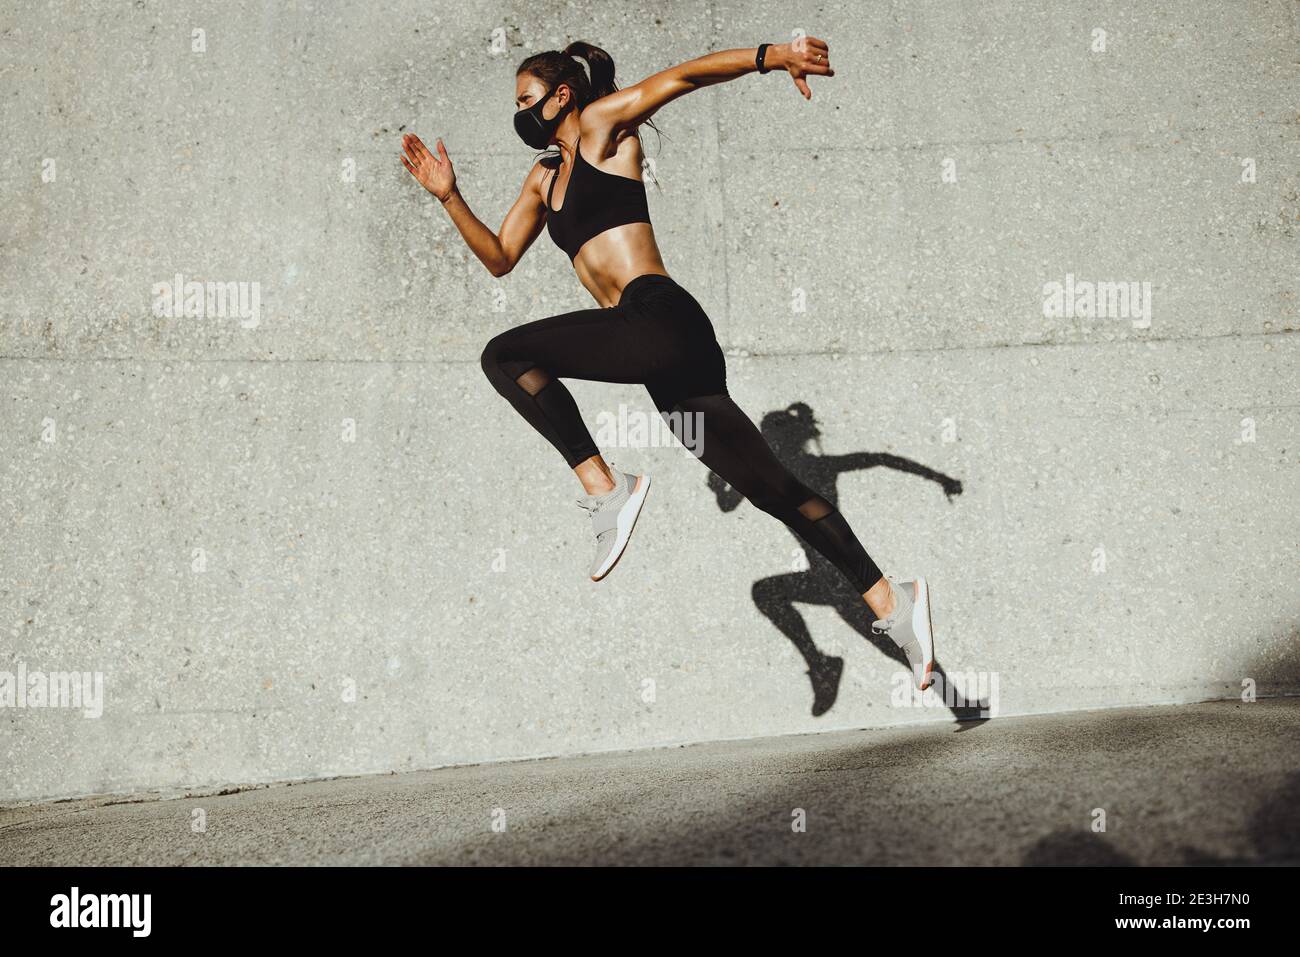 Fitness woman wearing face mask running outdoors. Woman athlete exercising outdoors in morning. Stock Photo